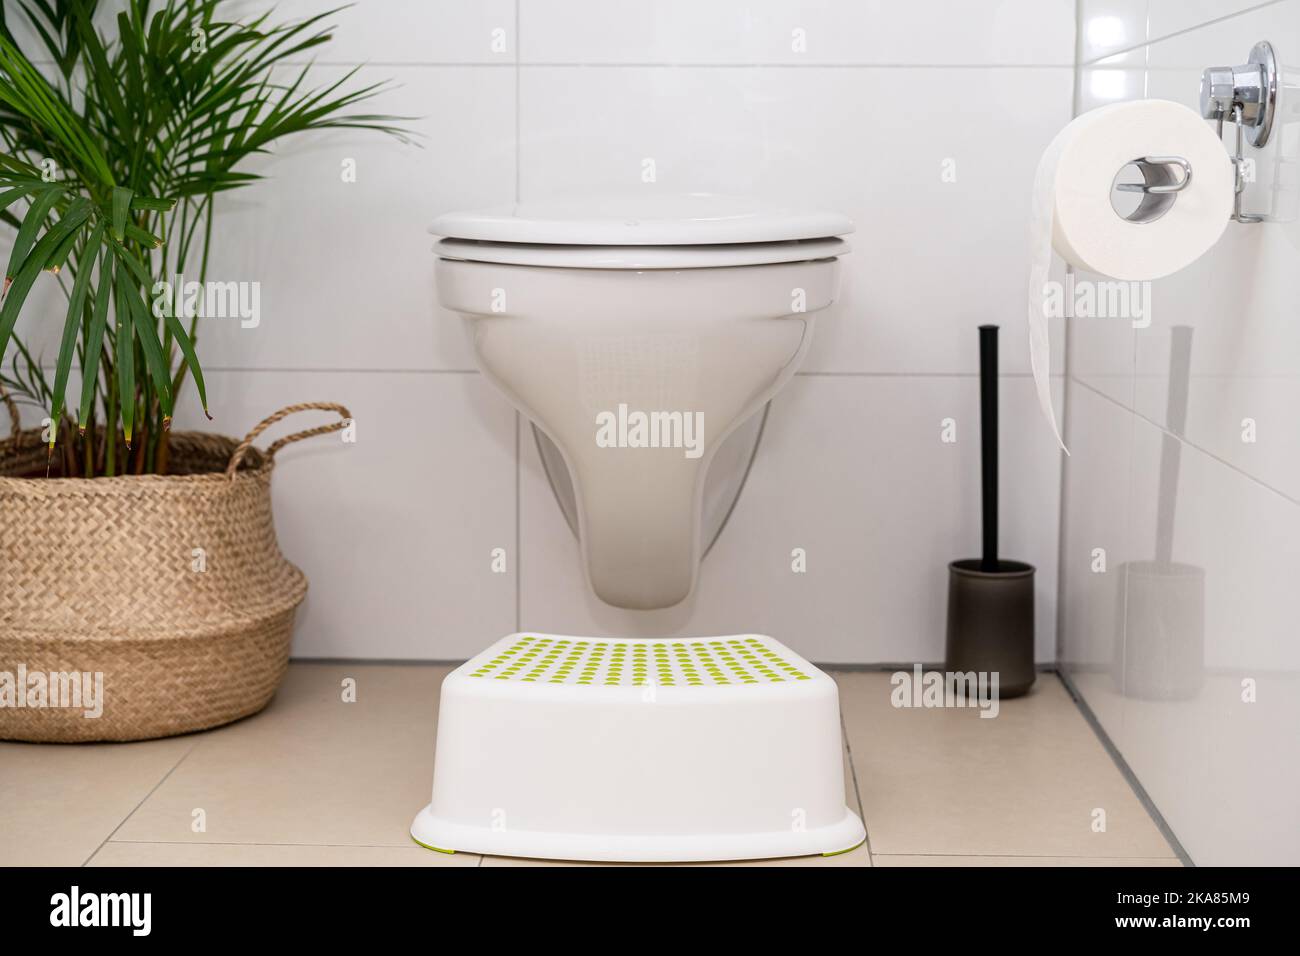 Foot lifter for posture suitable for defecation in the toilet. Healthy positions for defecate. Stock Photo